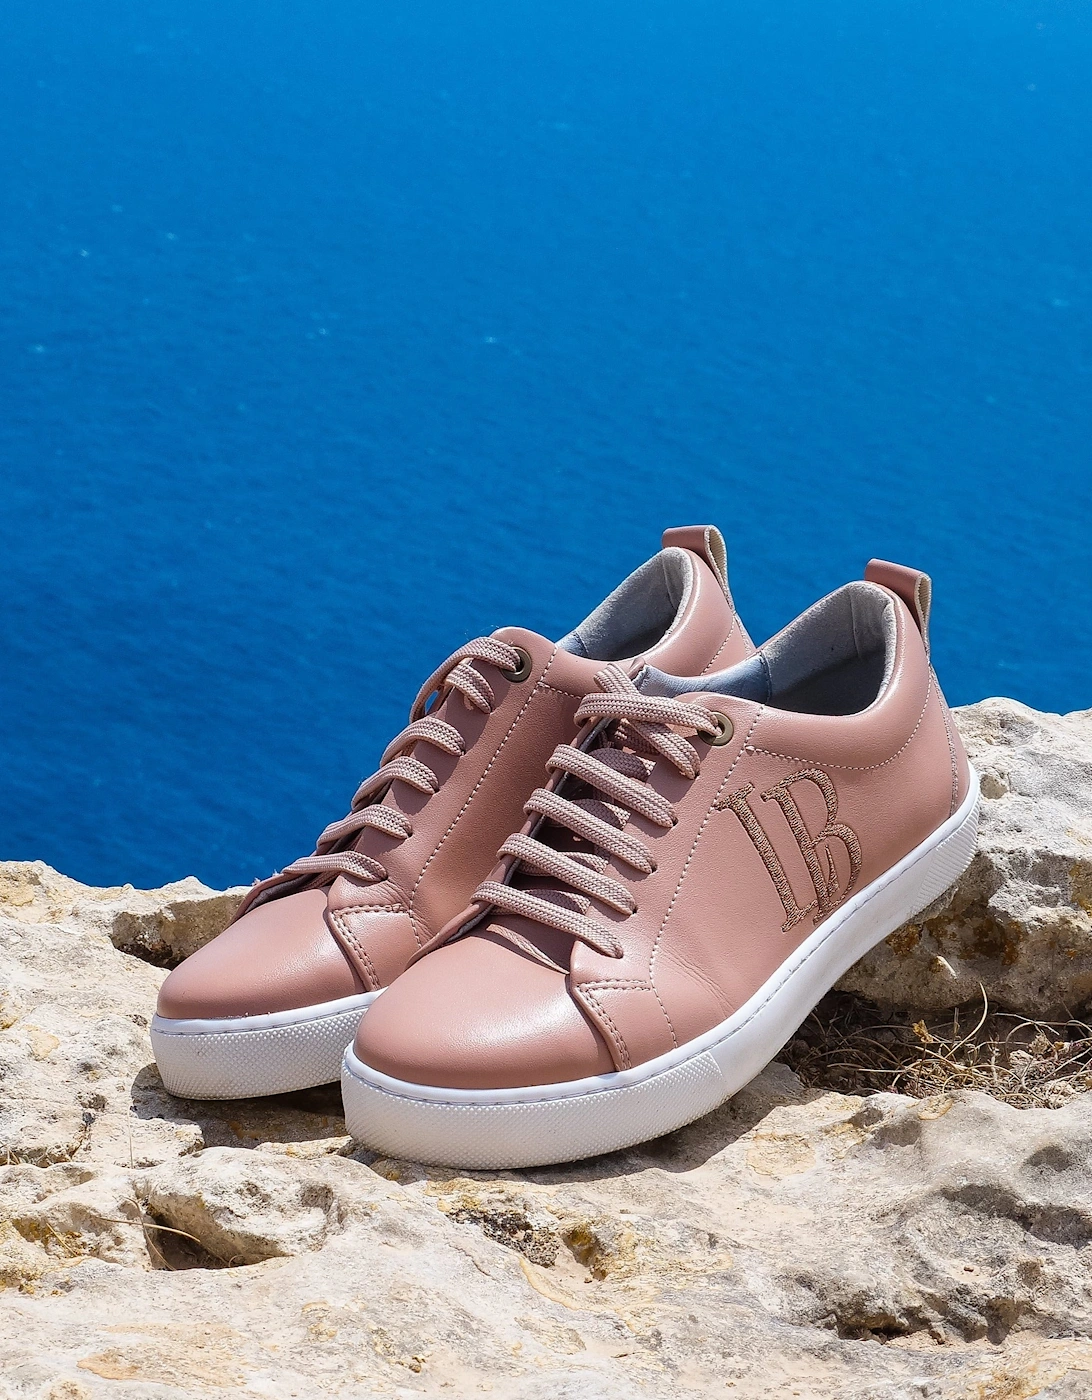 LB Nude Apple Leather Sneakers for Women